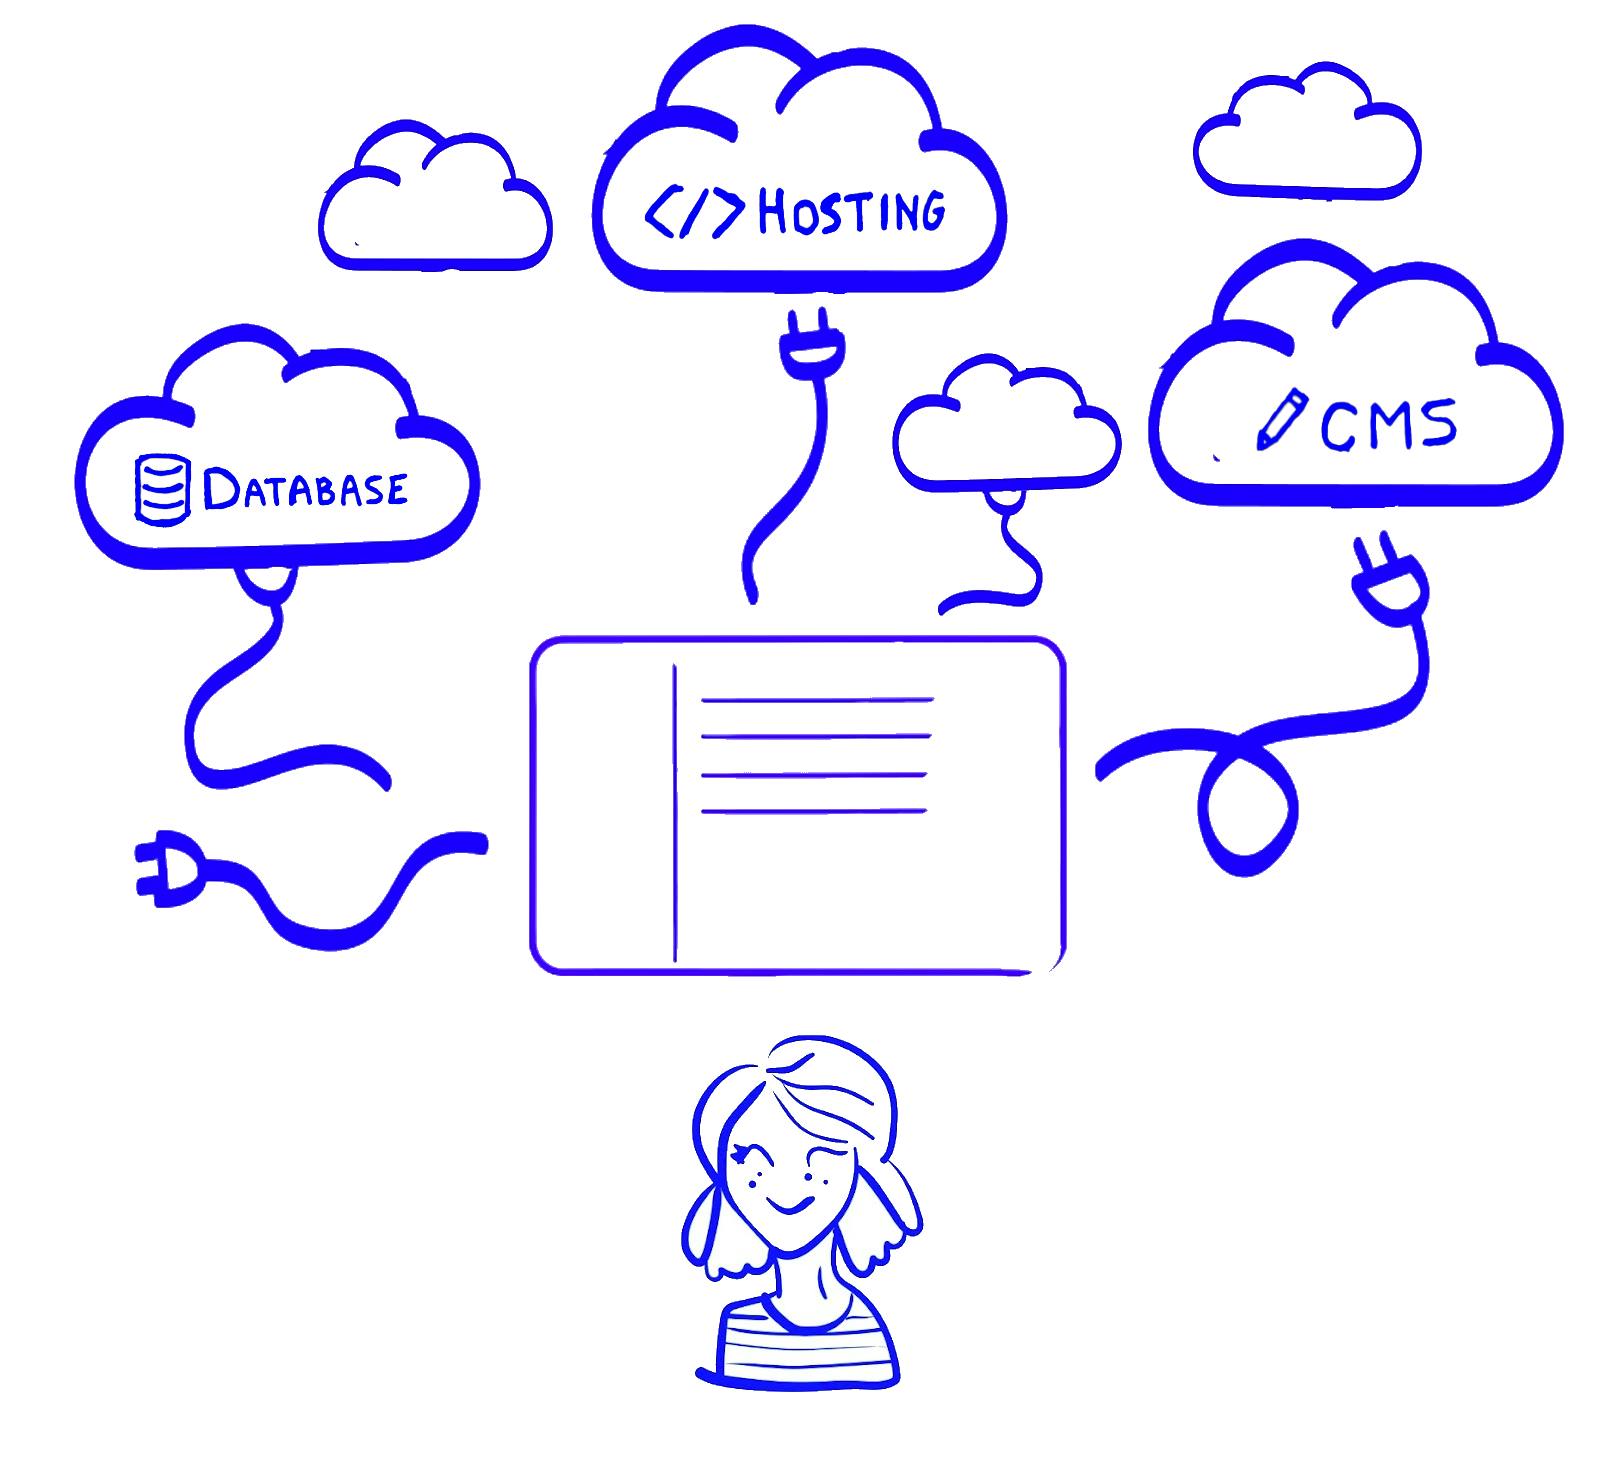 Illustration representing a user with a draft of a website over it and big clouds representing the database, hosting and CMS. Plugs go from the website to the clouds.